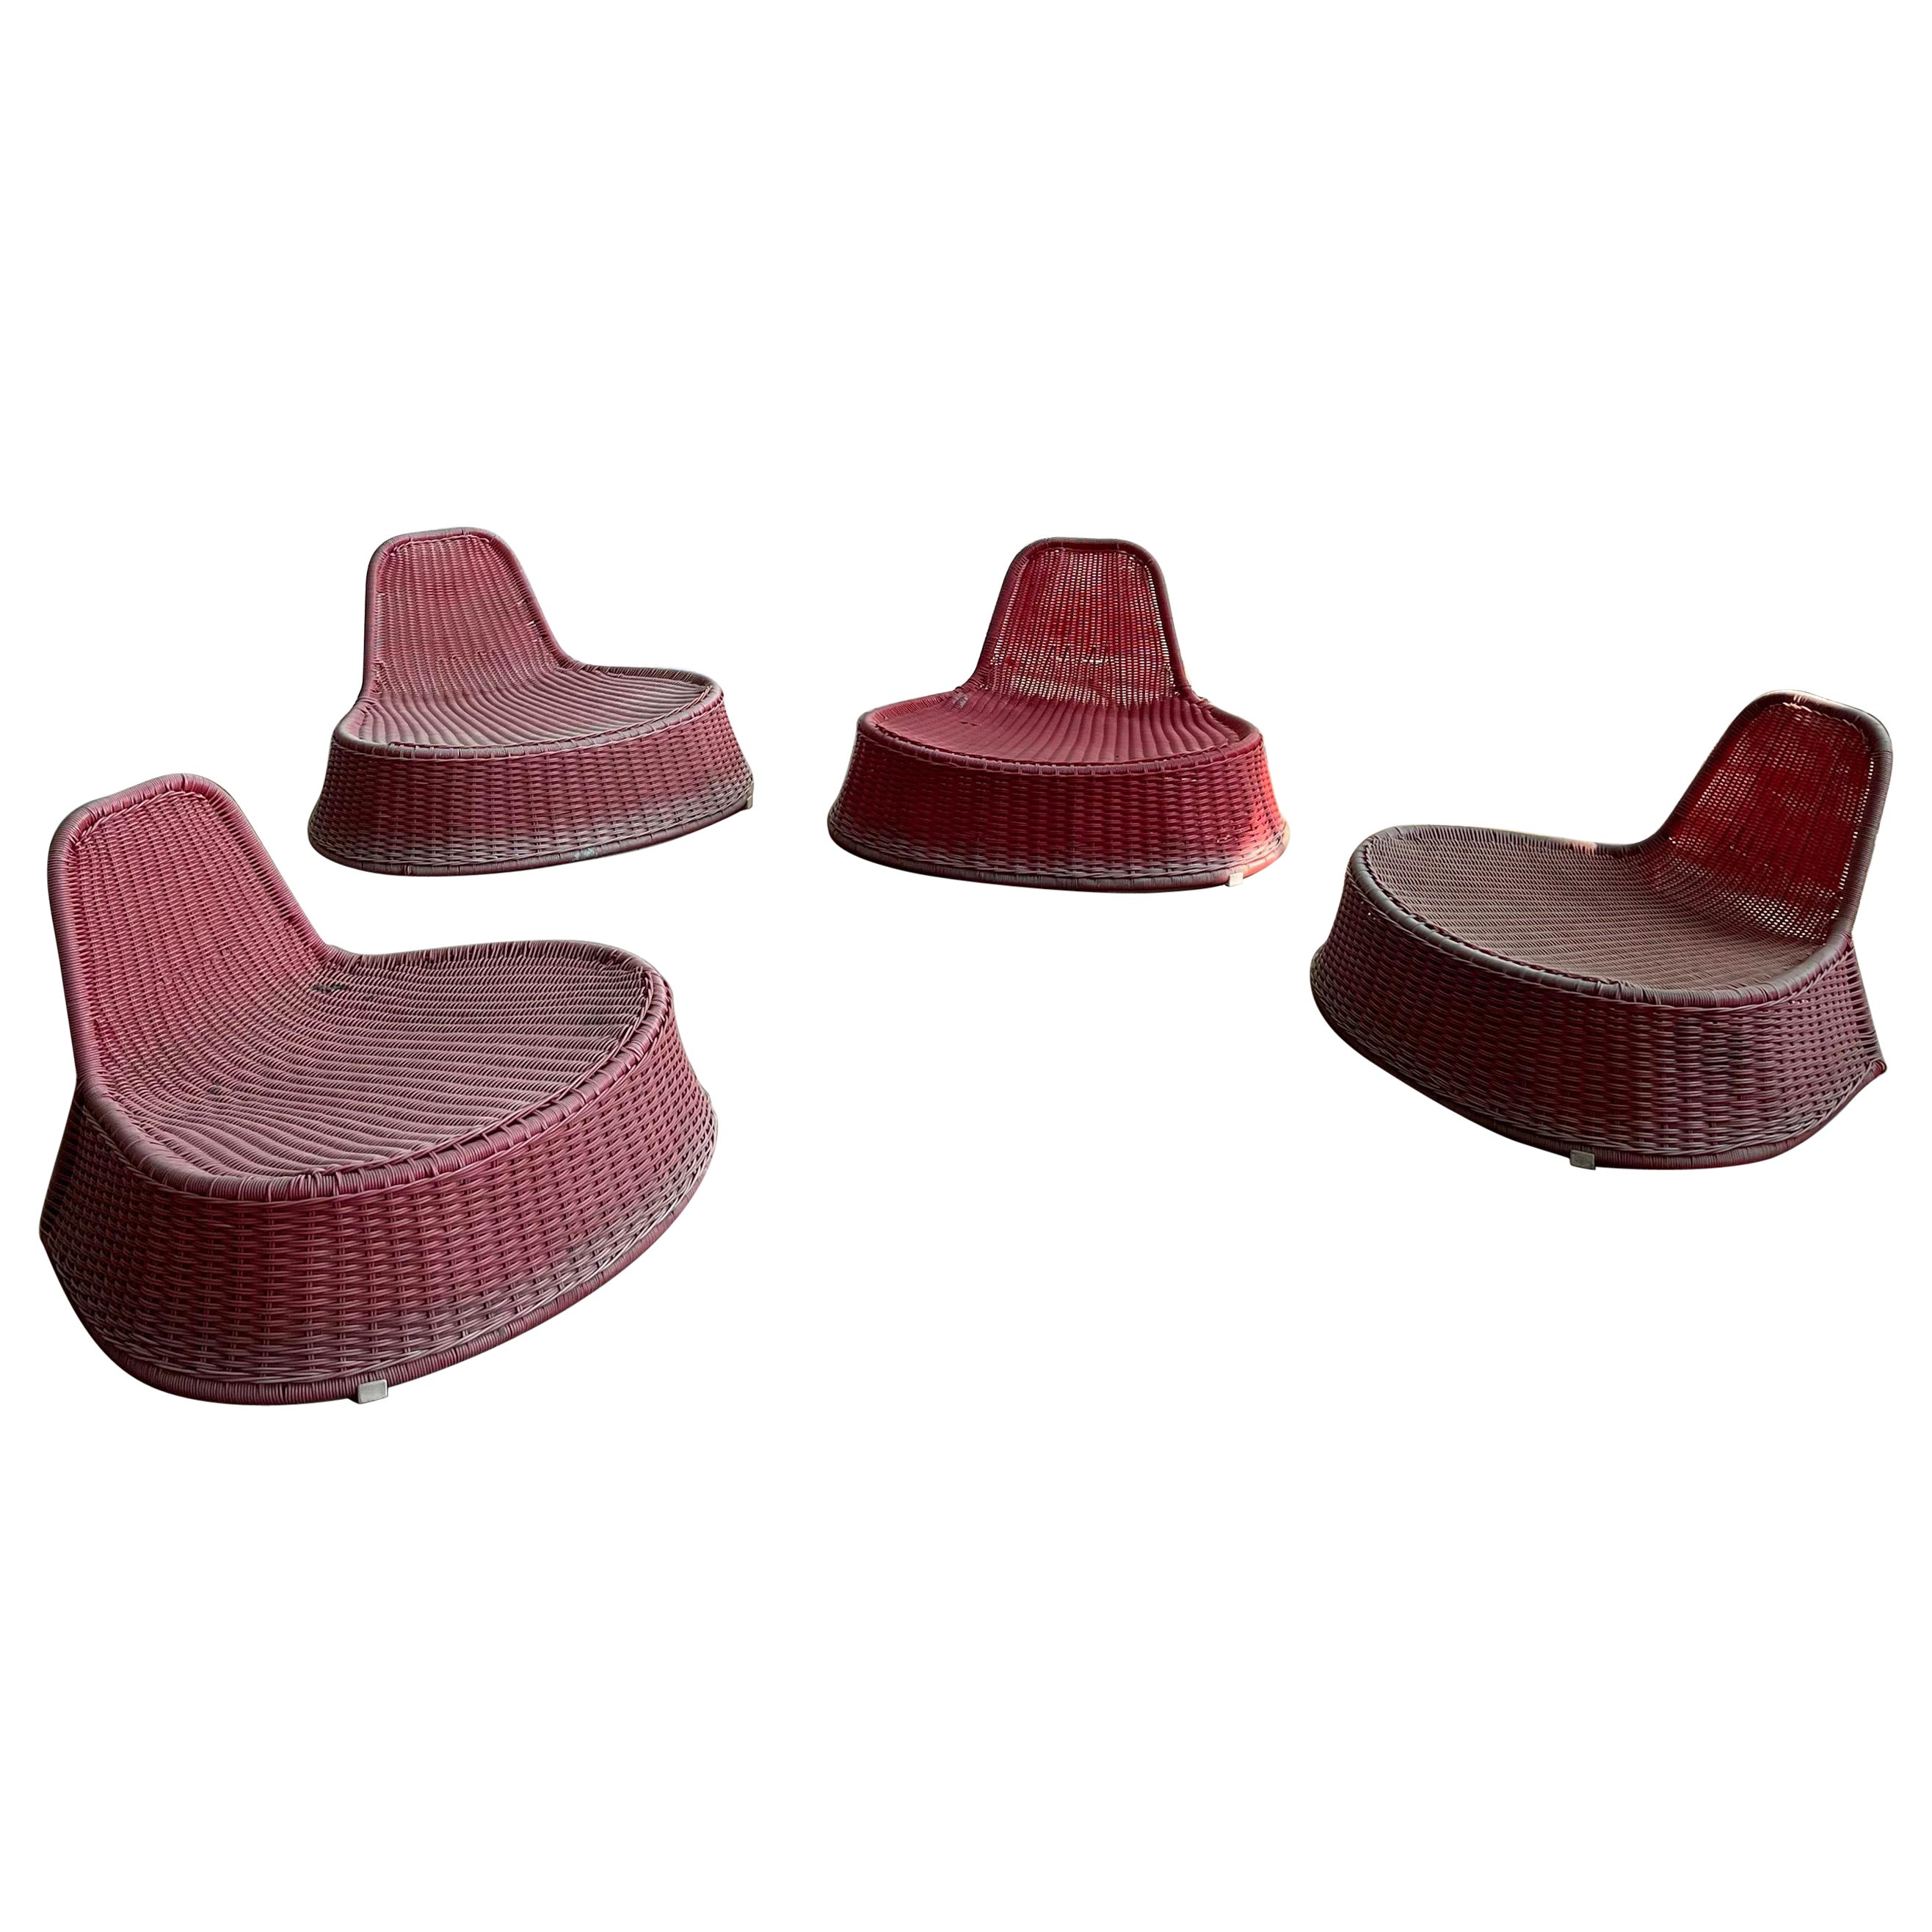 Pink Woven Outdoor Lounge Chairs By Monika Mulder For Ikea For Sale